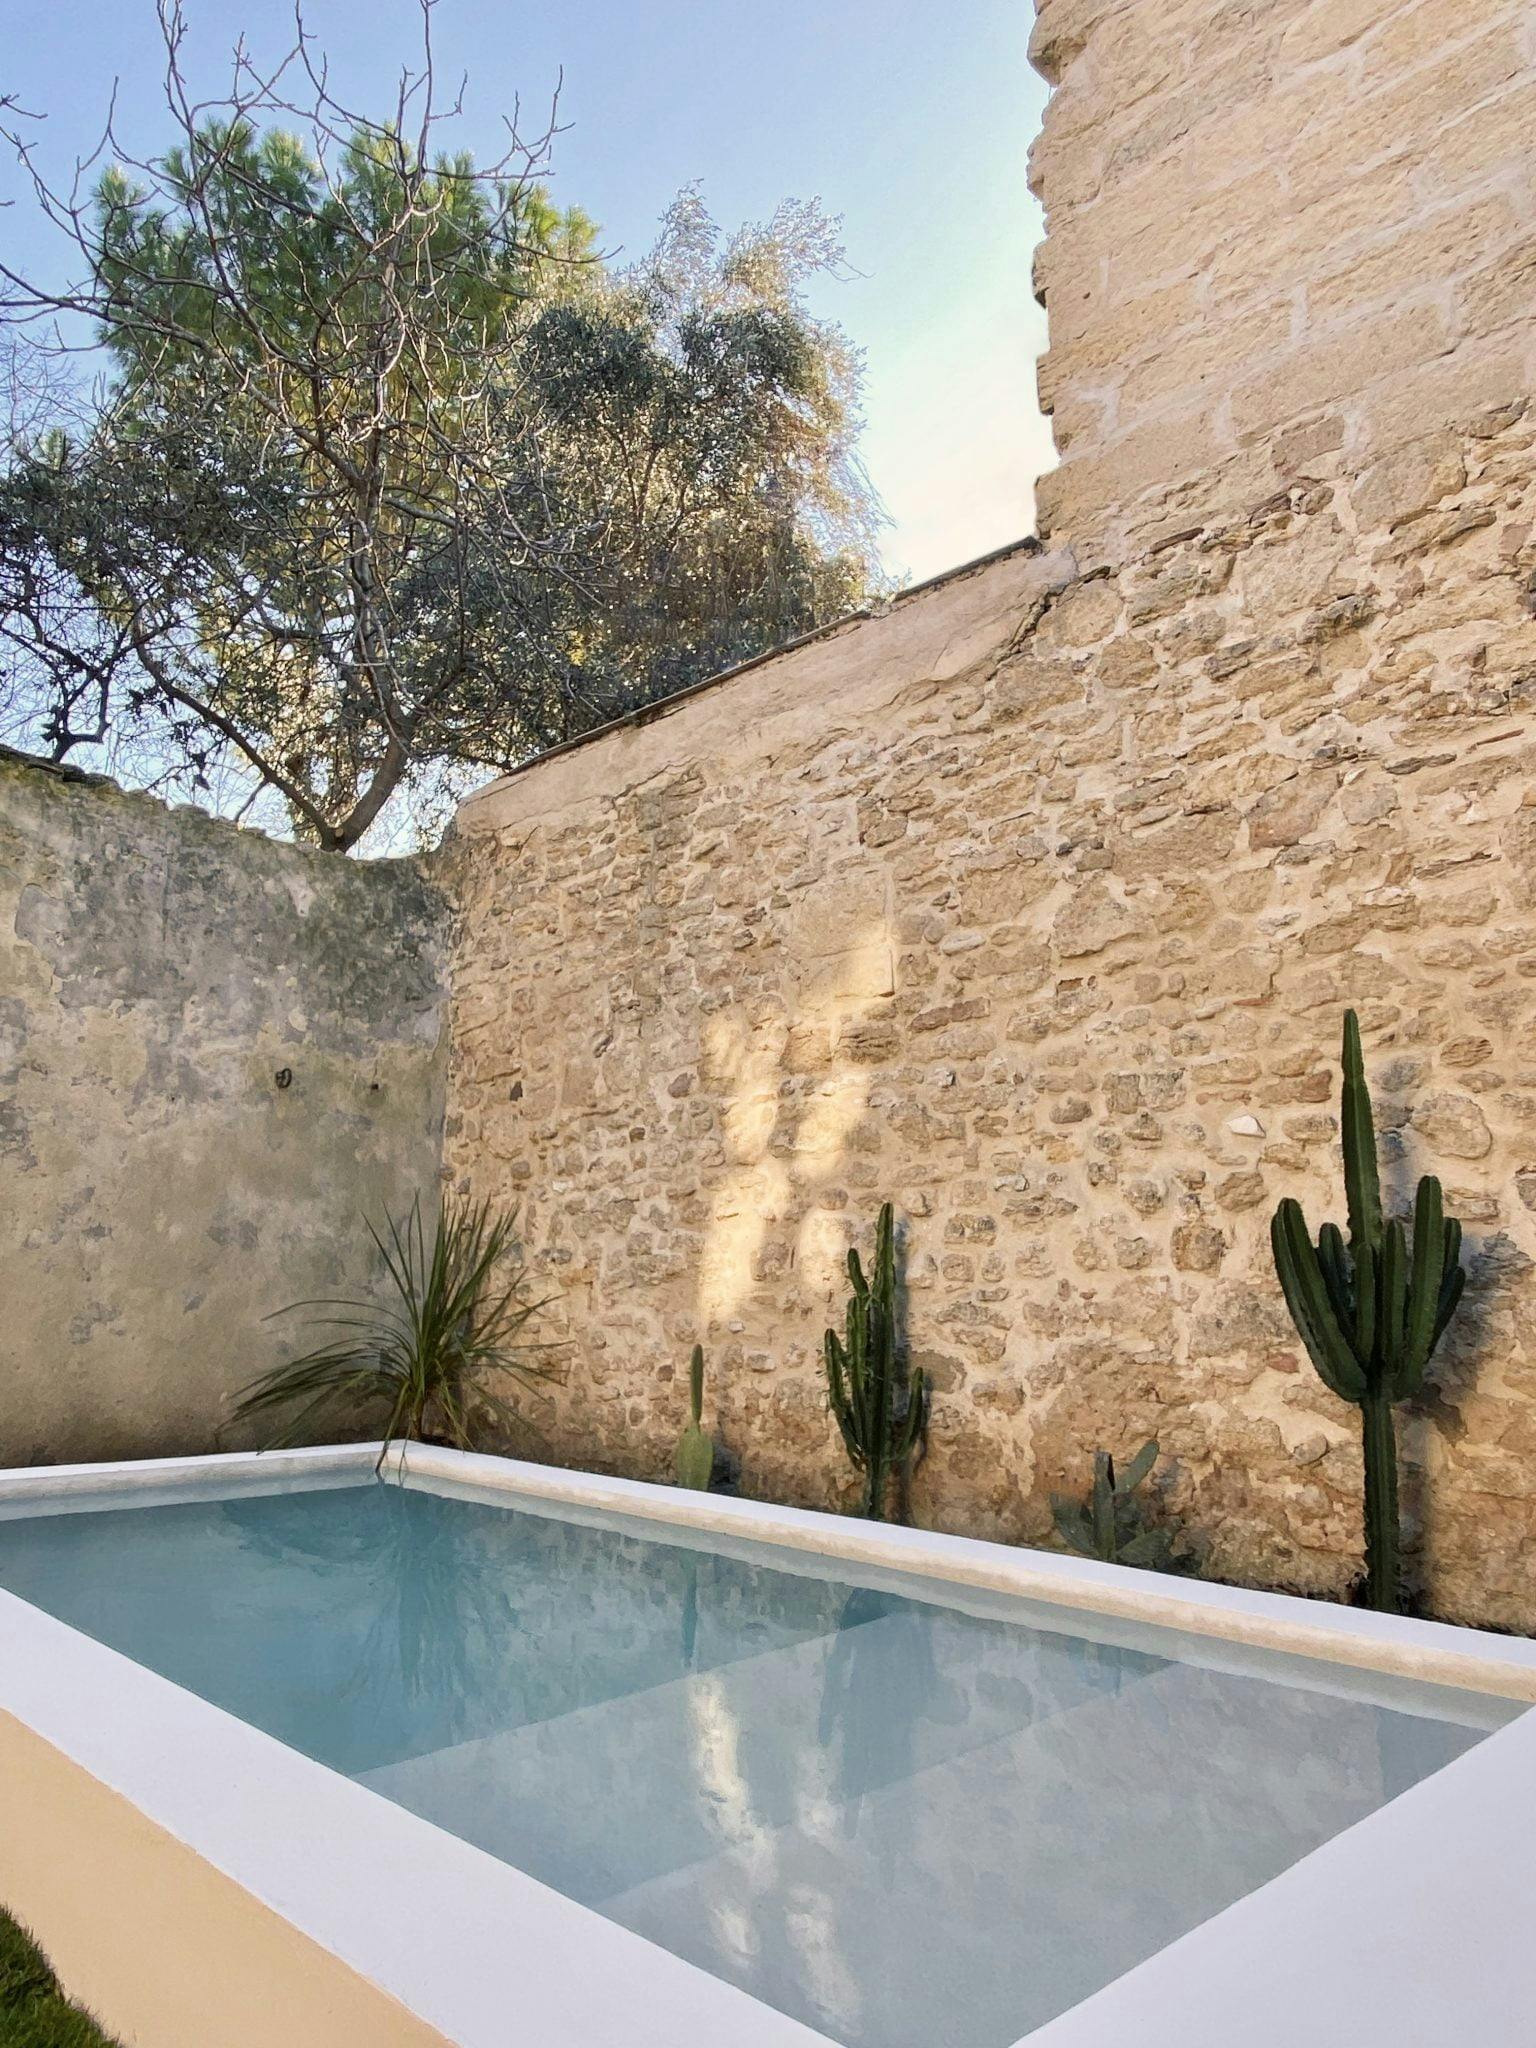 Dream pool lined with cactus and high stone walls